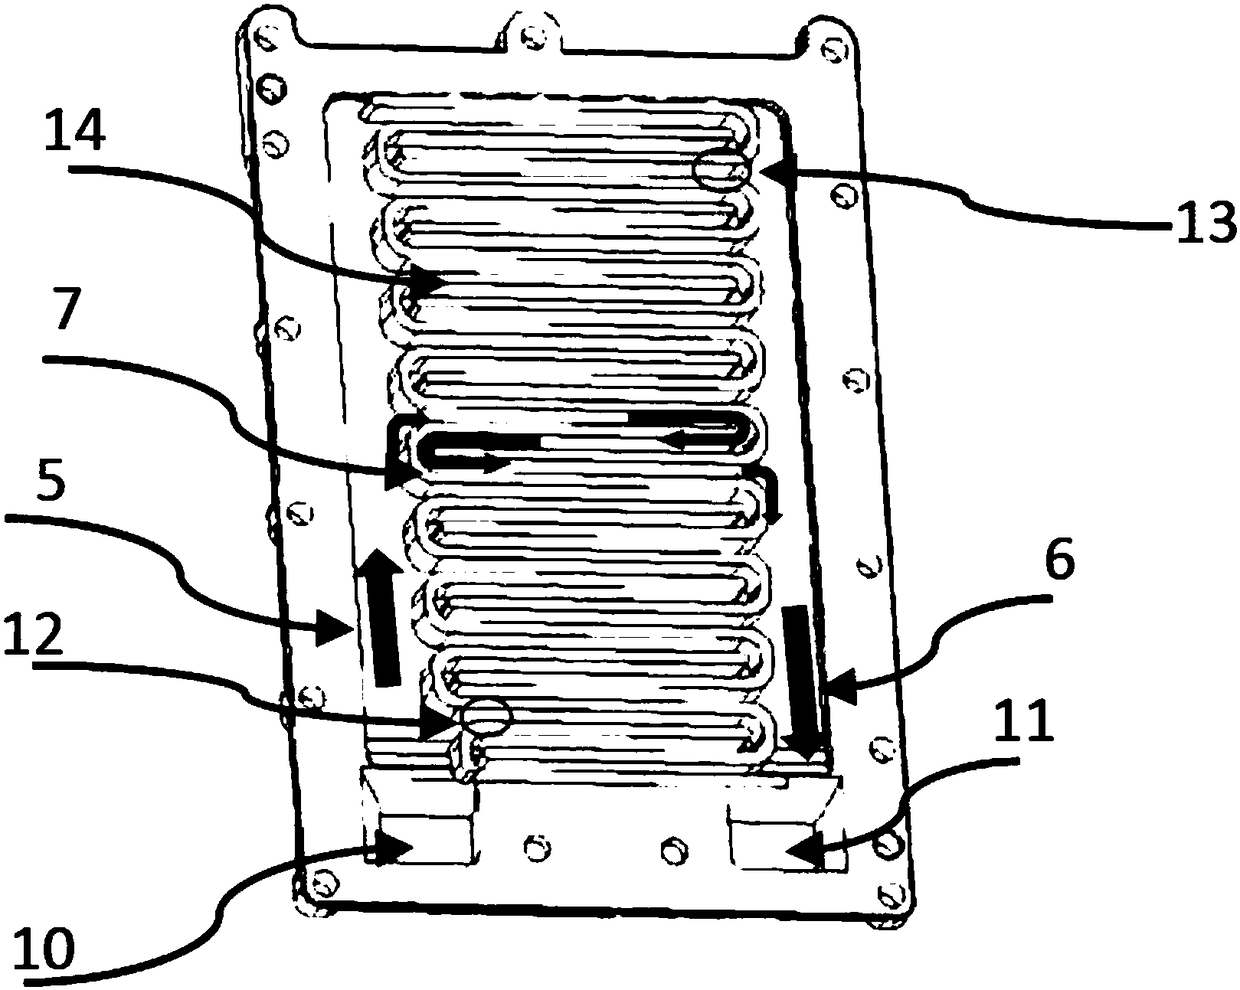 Runner layer structure of PTC electric heating device